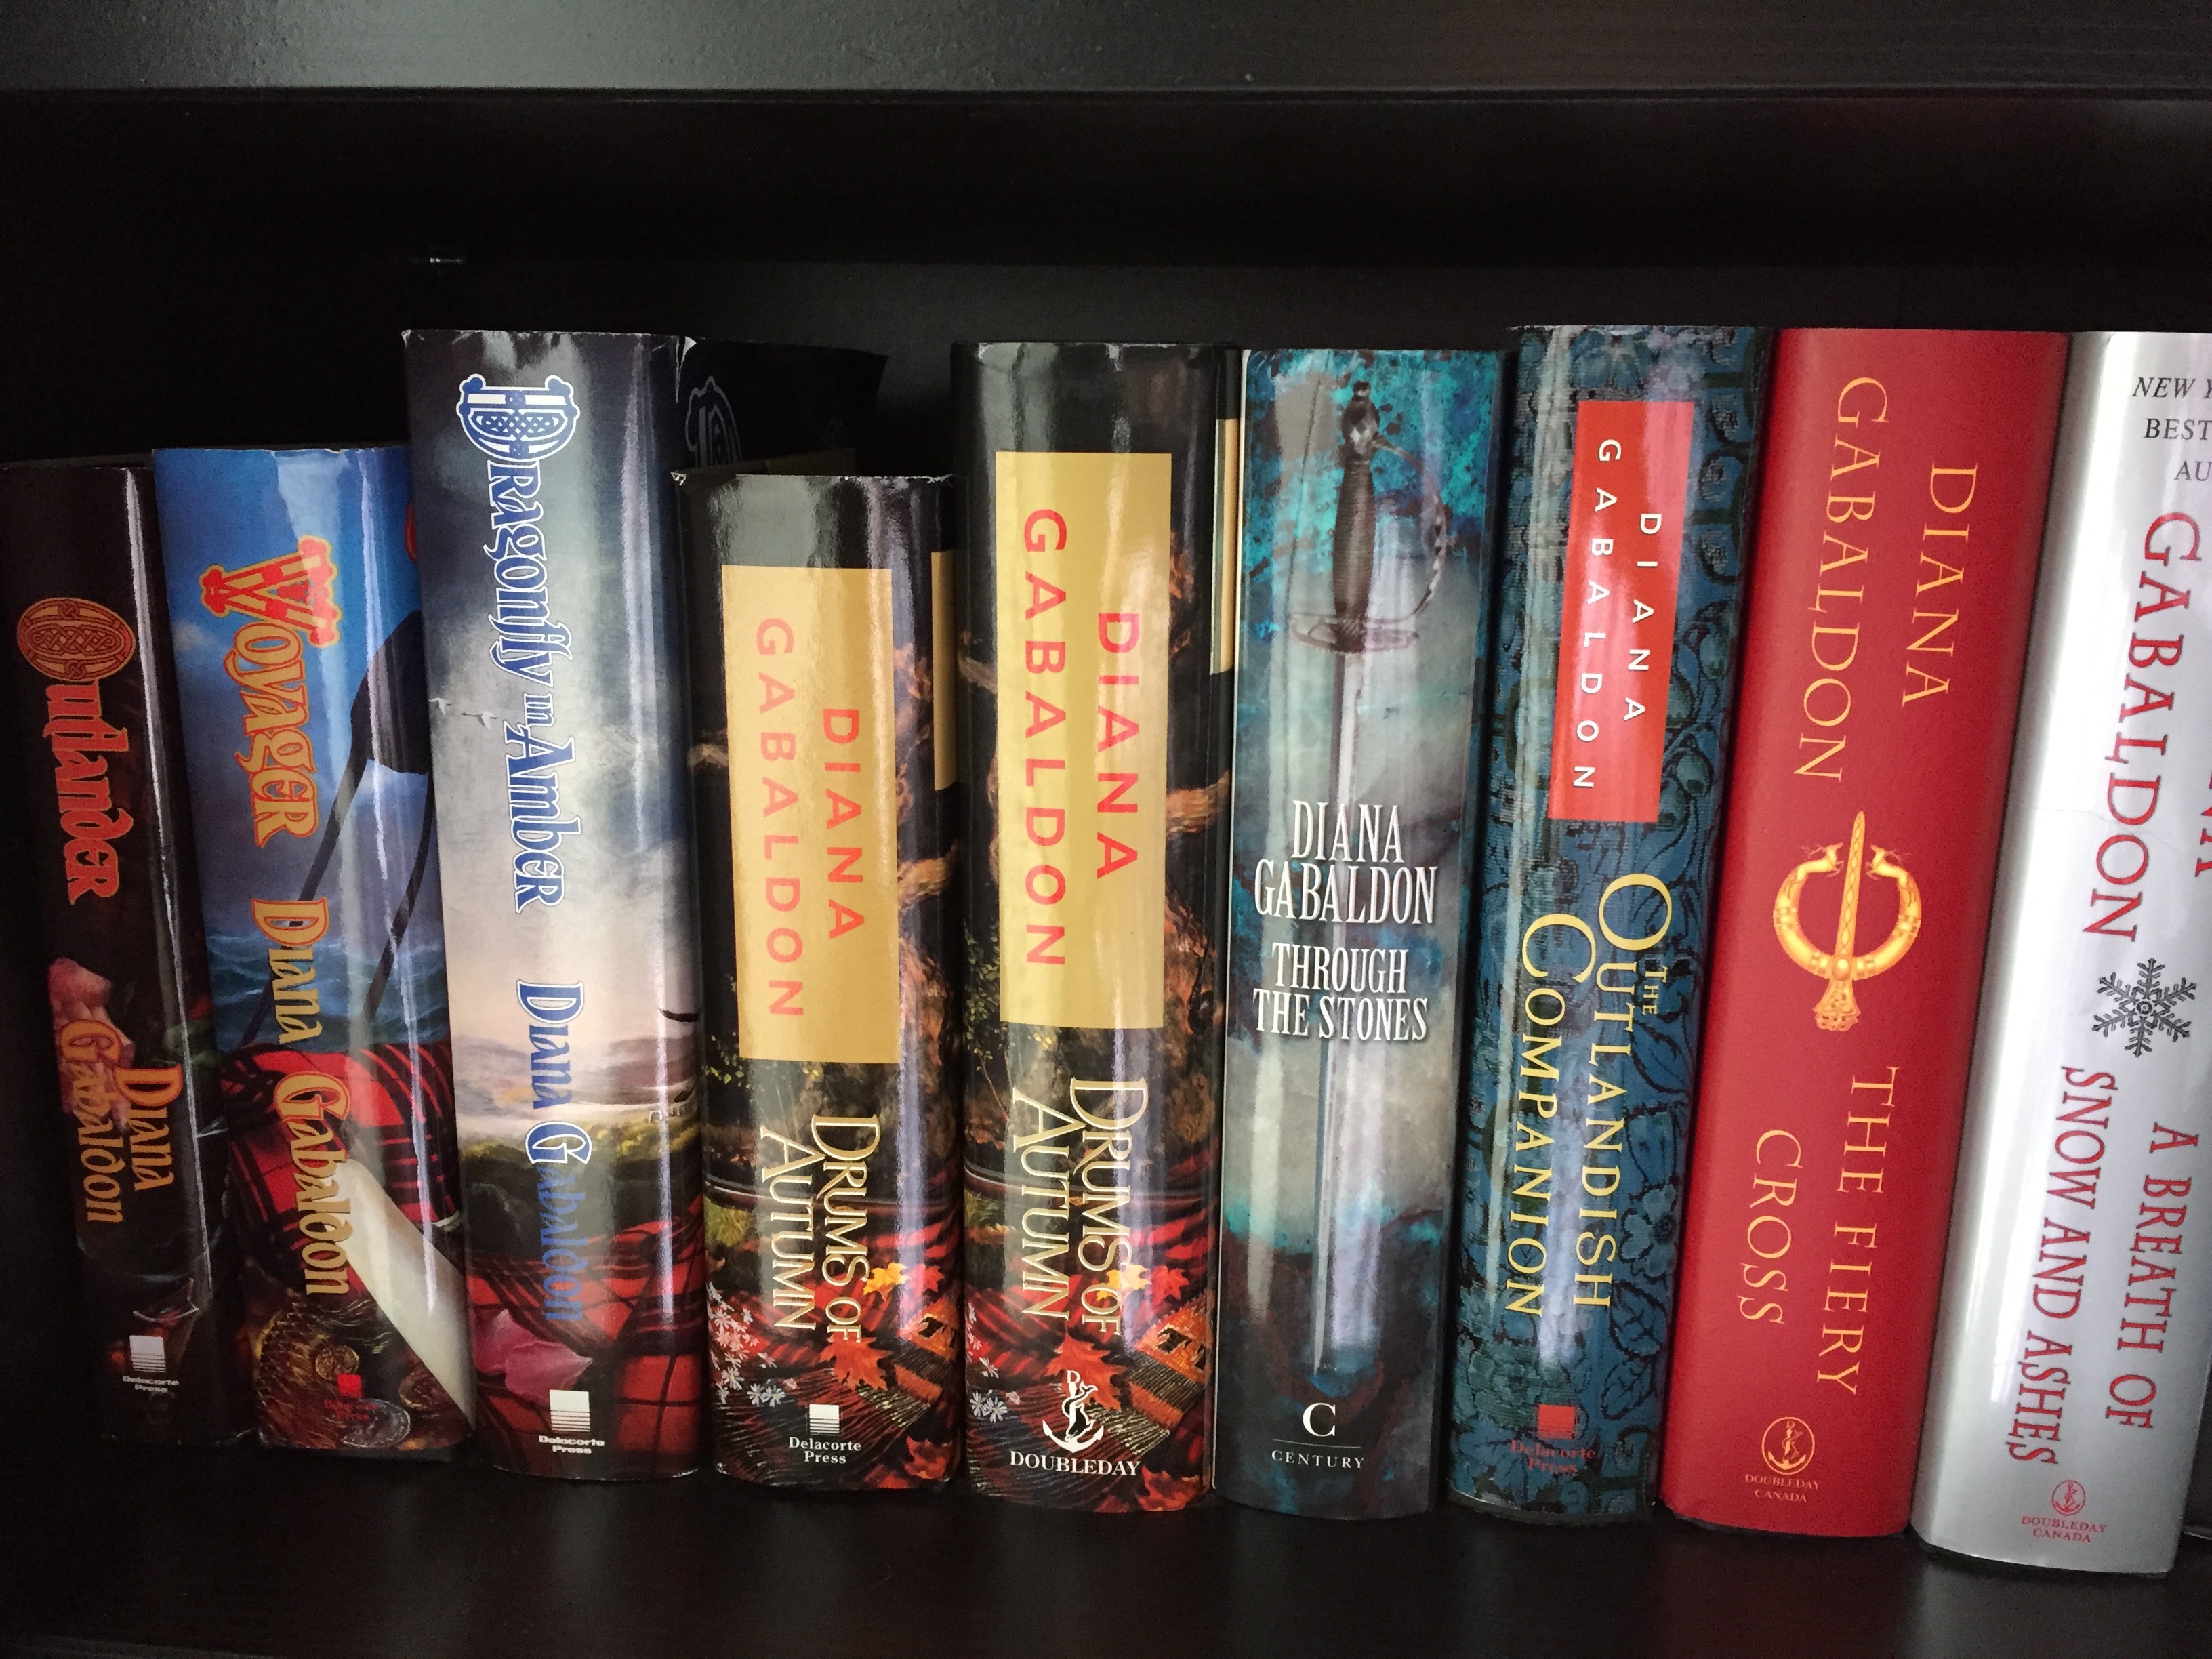 Diana Gabaldon Book Collection of Hardcover Books on Book Shelf - favourite authors